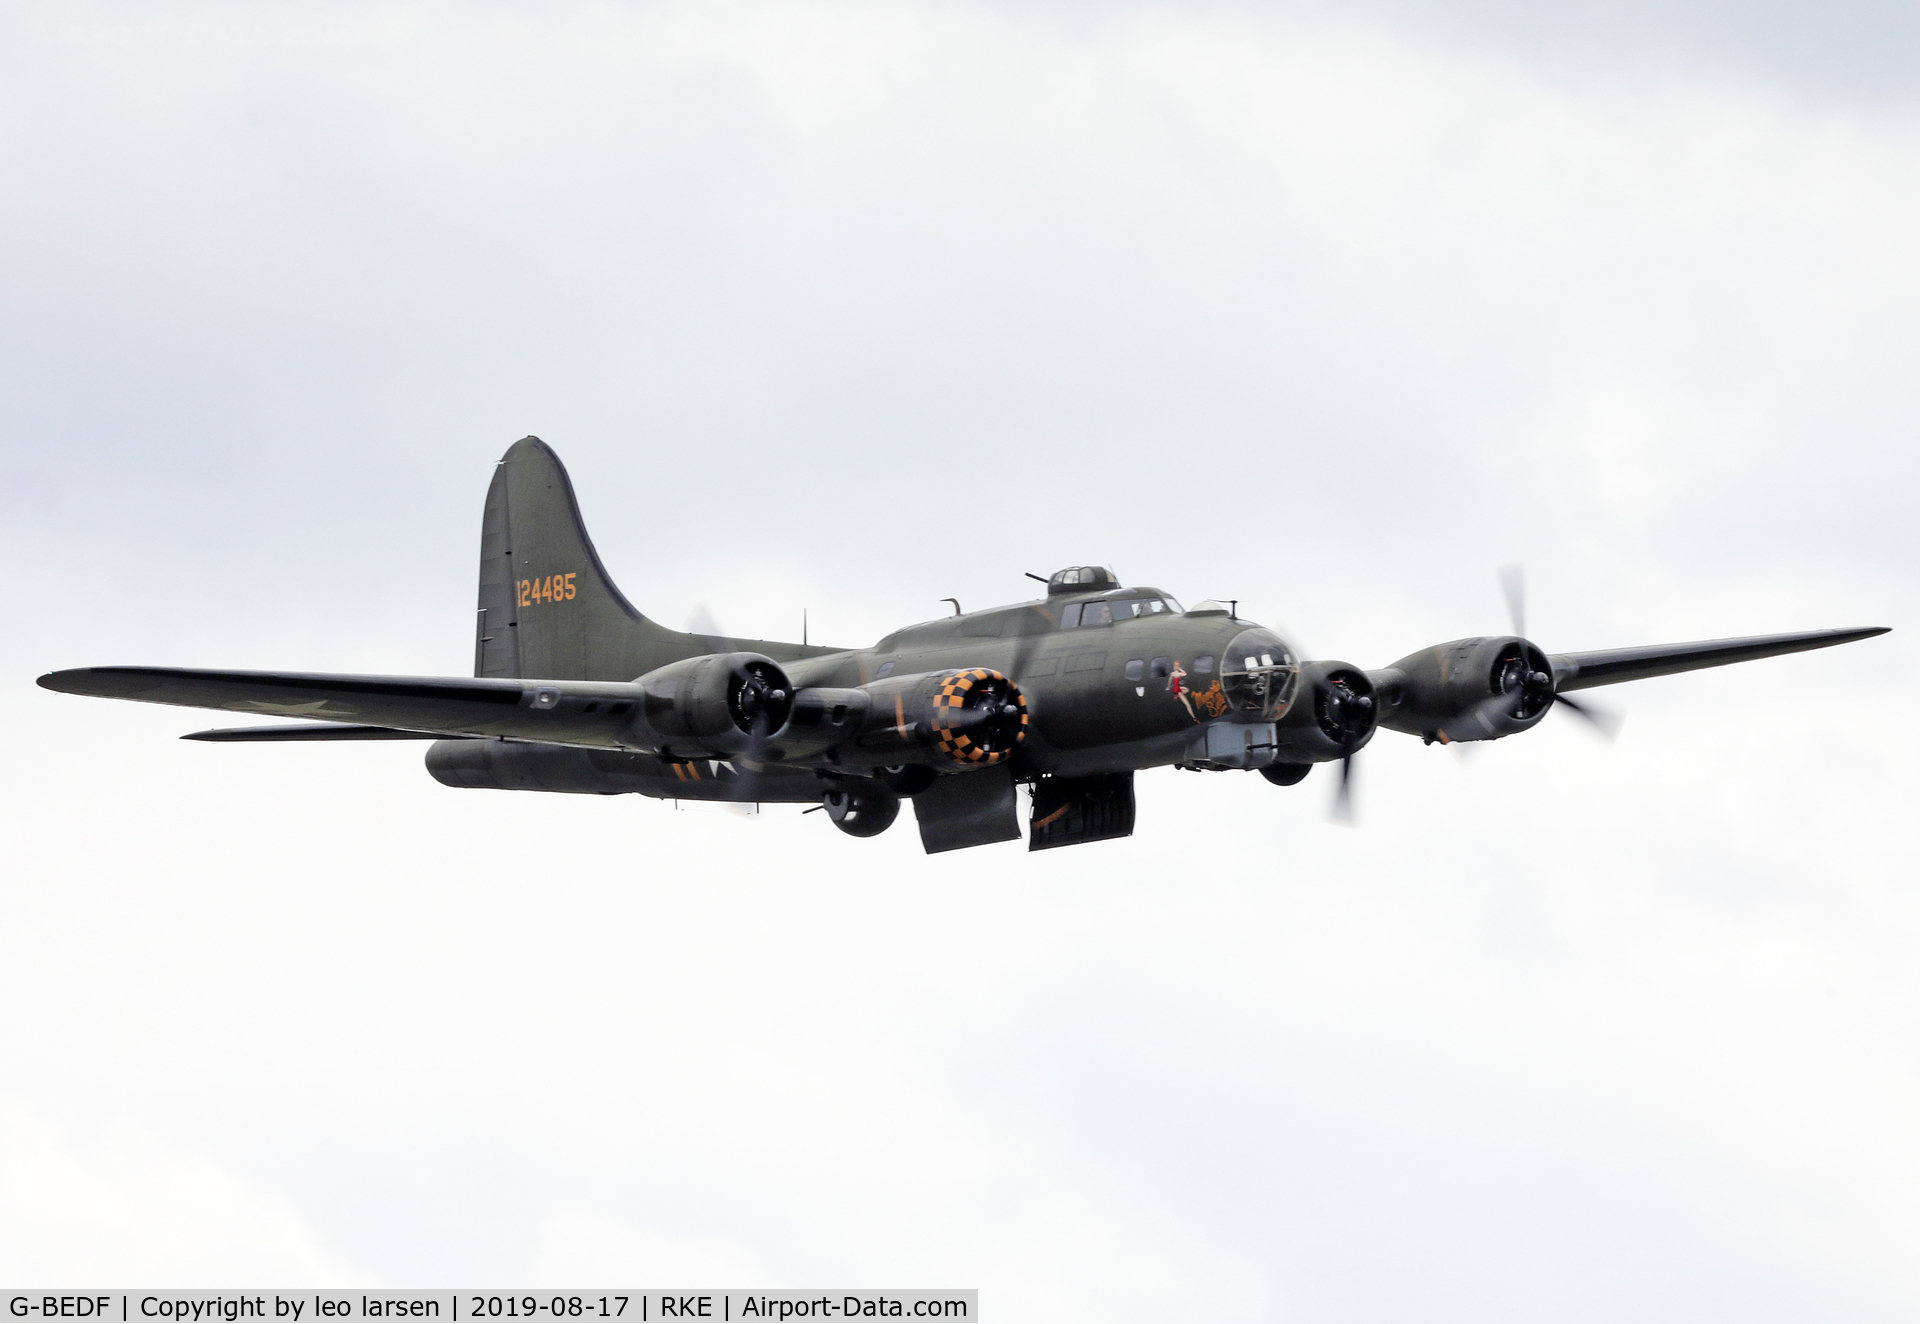 G-BEDF, 1944 Boeing B-17G Flying Fortress C/N 8693, Roskilde Air Show 17.8.2019 with Bomb door`s
open.